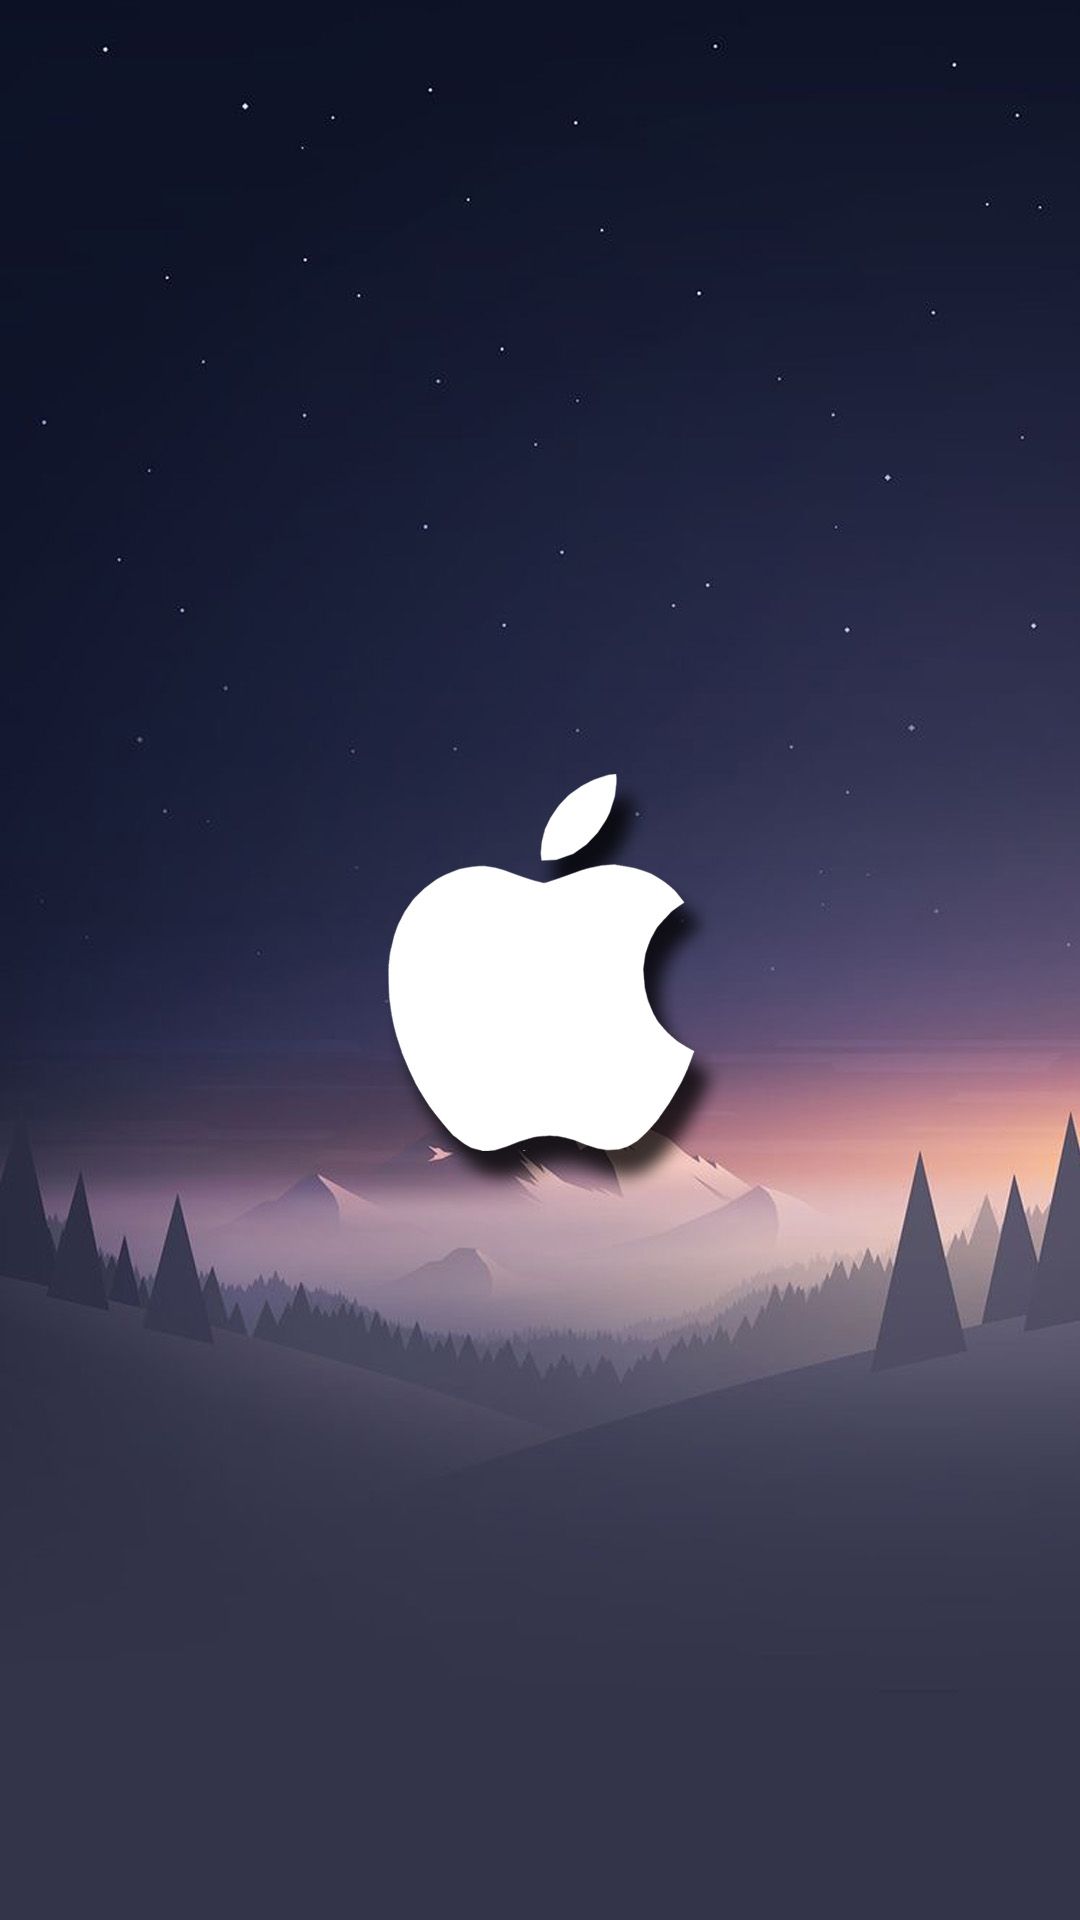 Take a look at. Apple logo wallpaper iphone, Apple wallpaper iphone, Apple iphone wallpaper hd